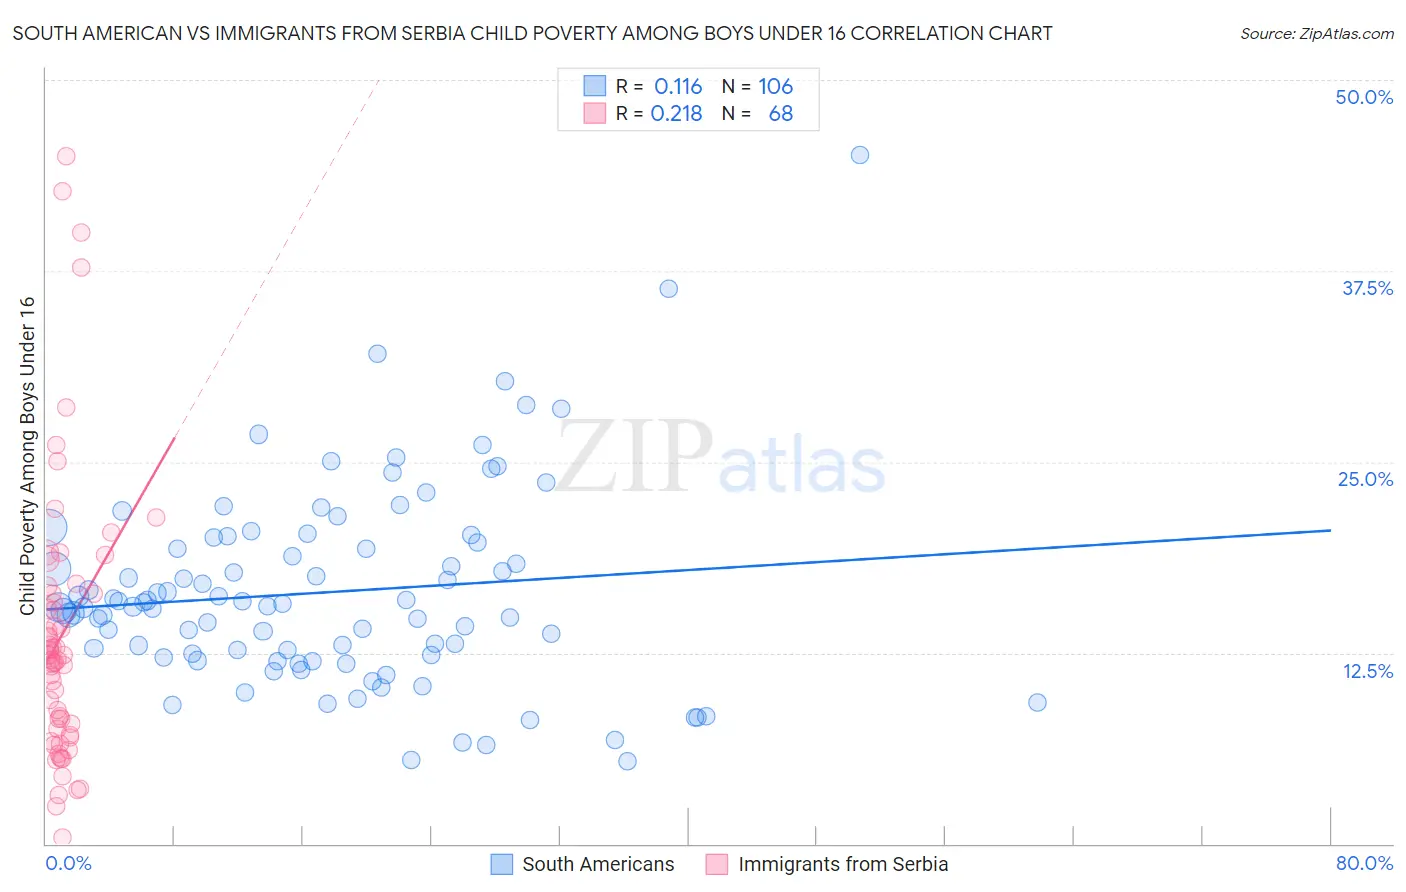 South American vs Immigrants from Serbia Child Poverty Among Boys Under 16